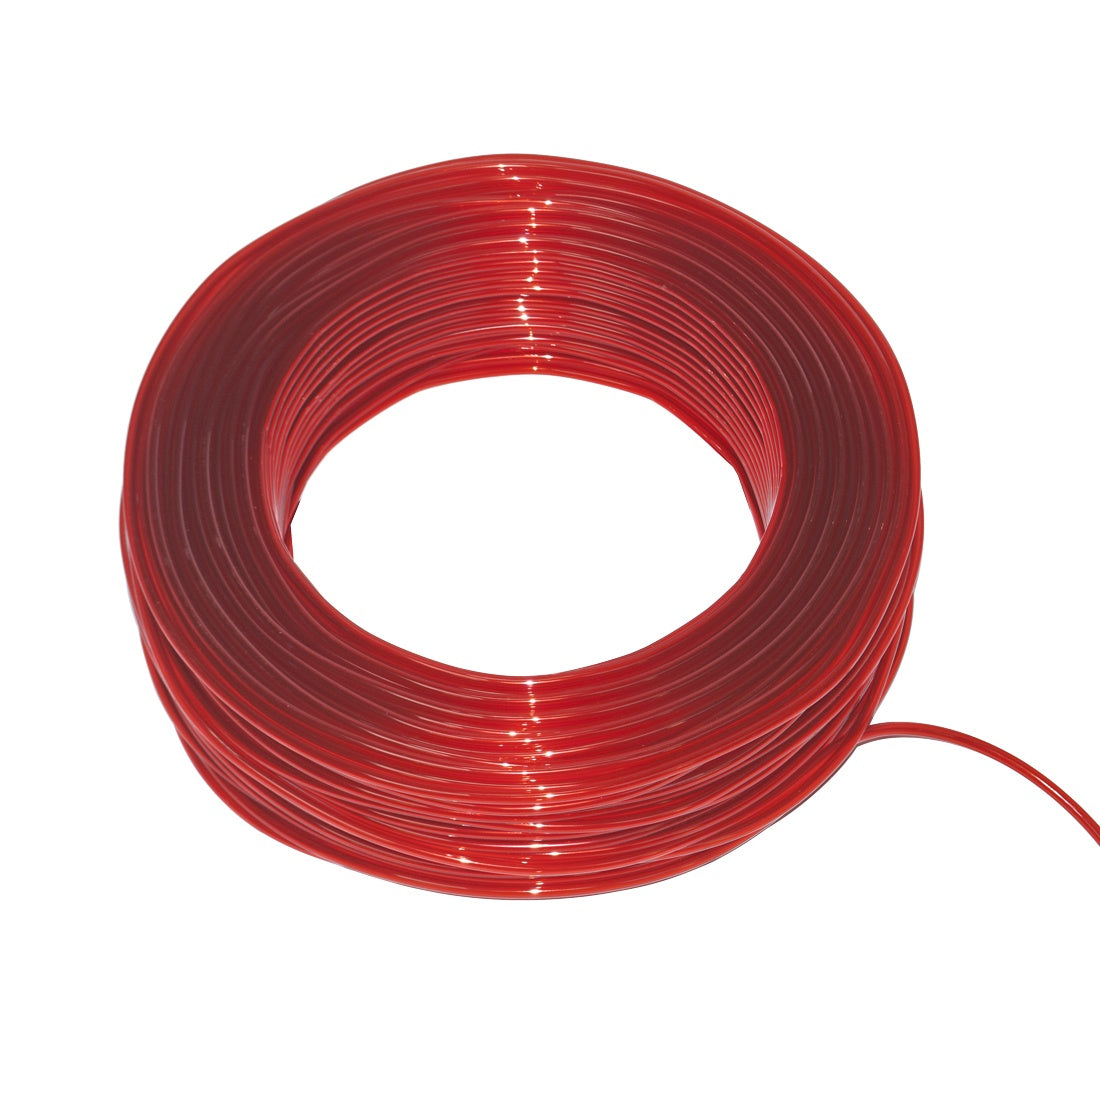 XERO-Supply-Hose-Red-Rolled